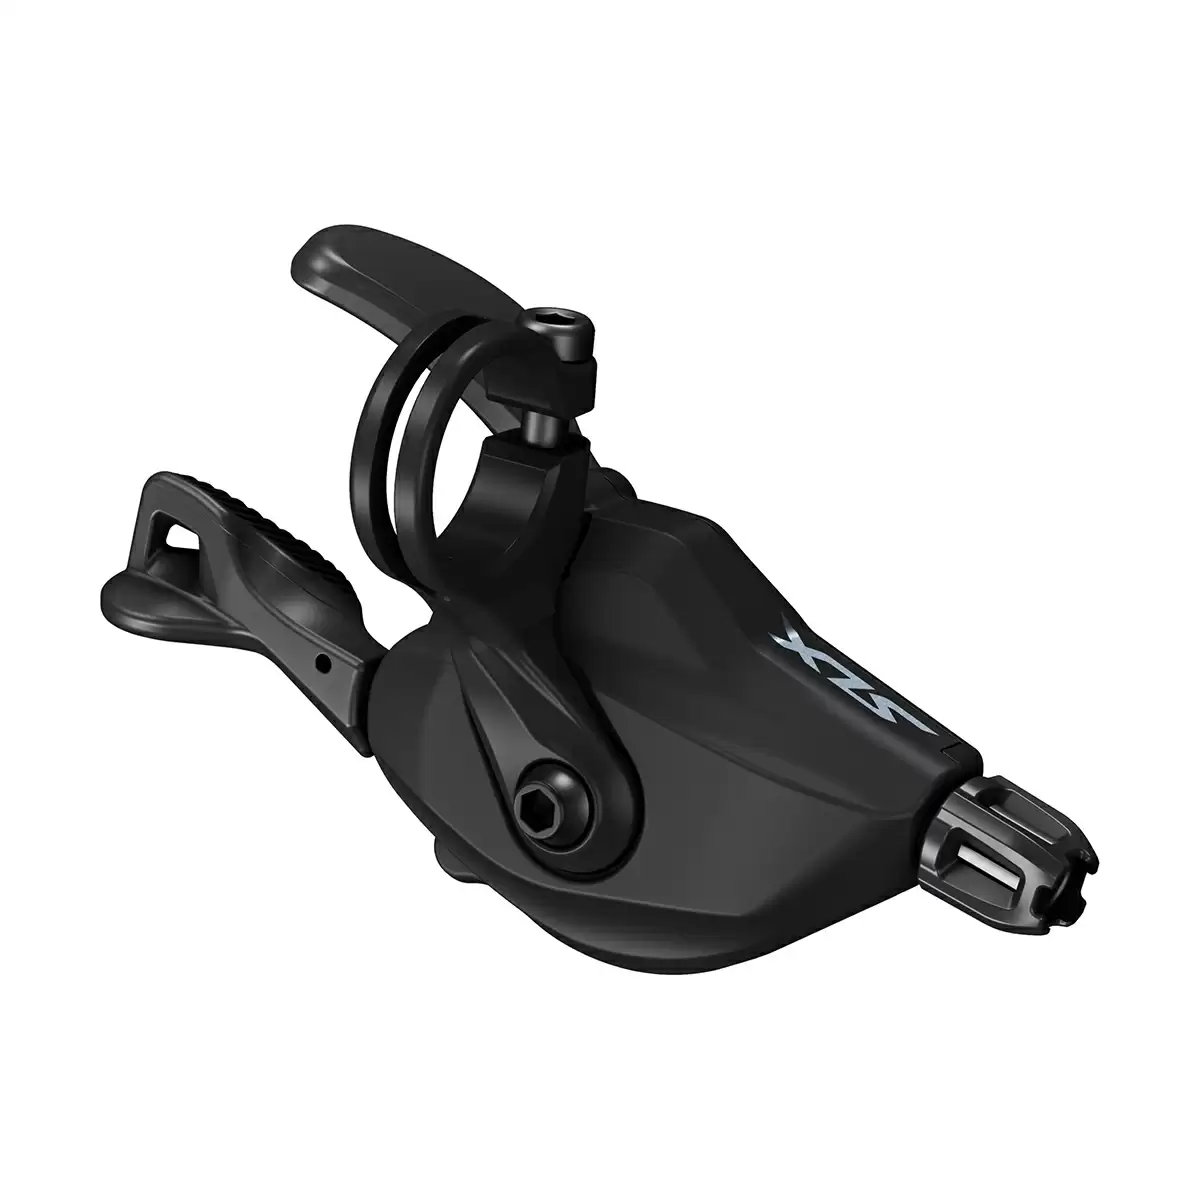 Right Hand Shift Lever SLX SL-M7100 Clamp Mount 12s - image